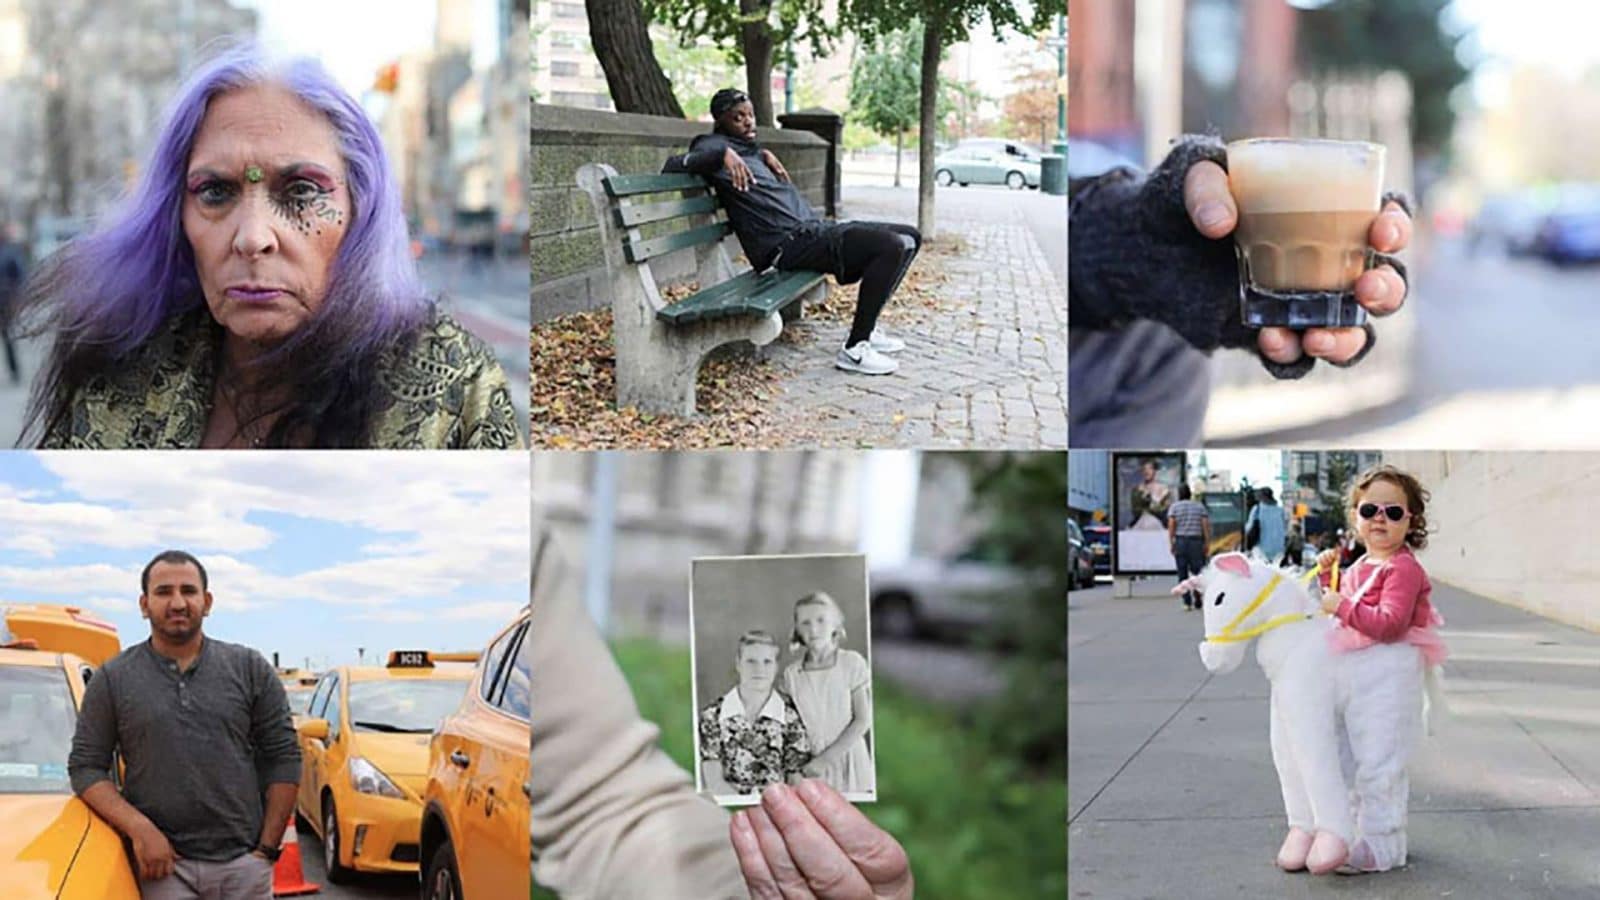 Humans of new york Case study